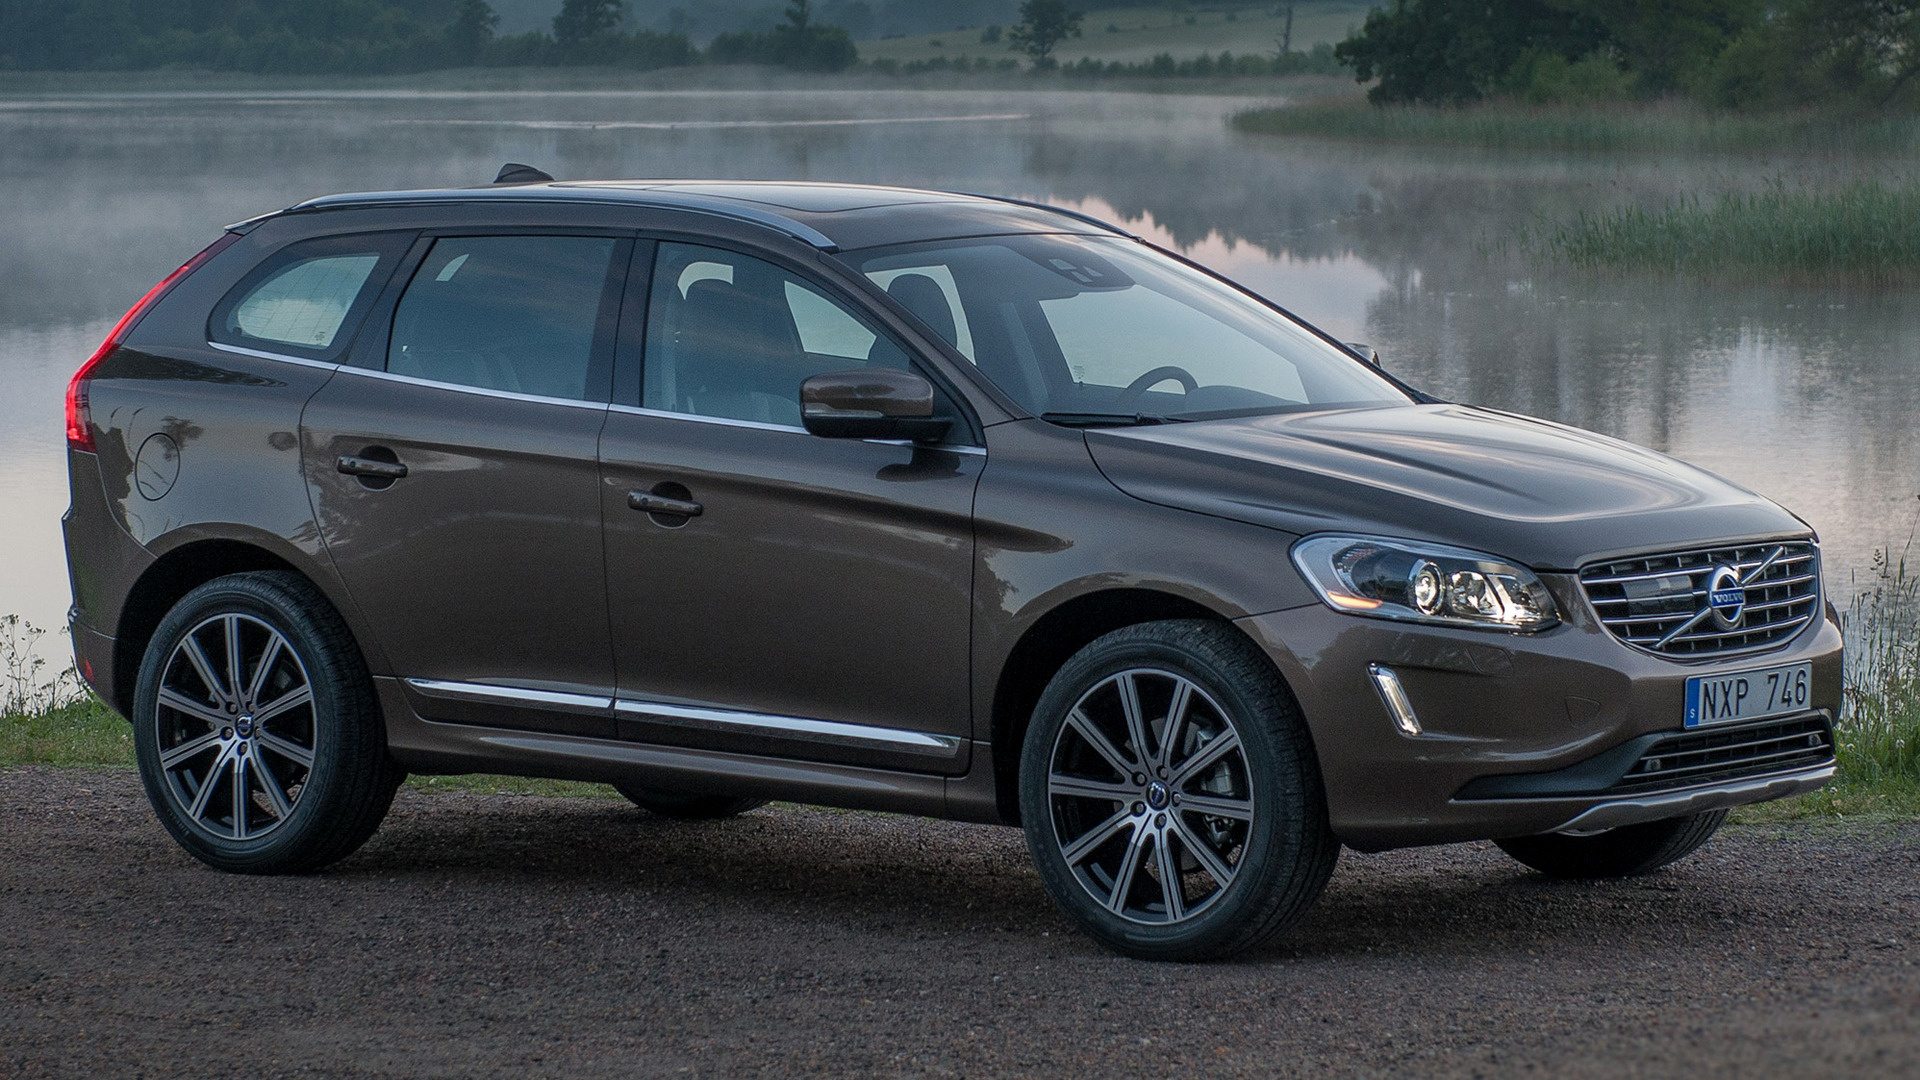 2013 Volvo Xc60 Wallpapers And Hd Images Car Pixel